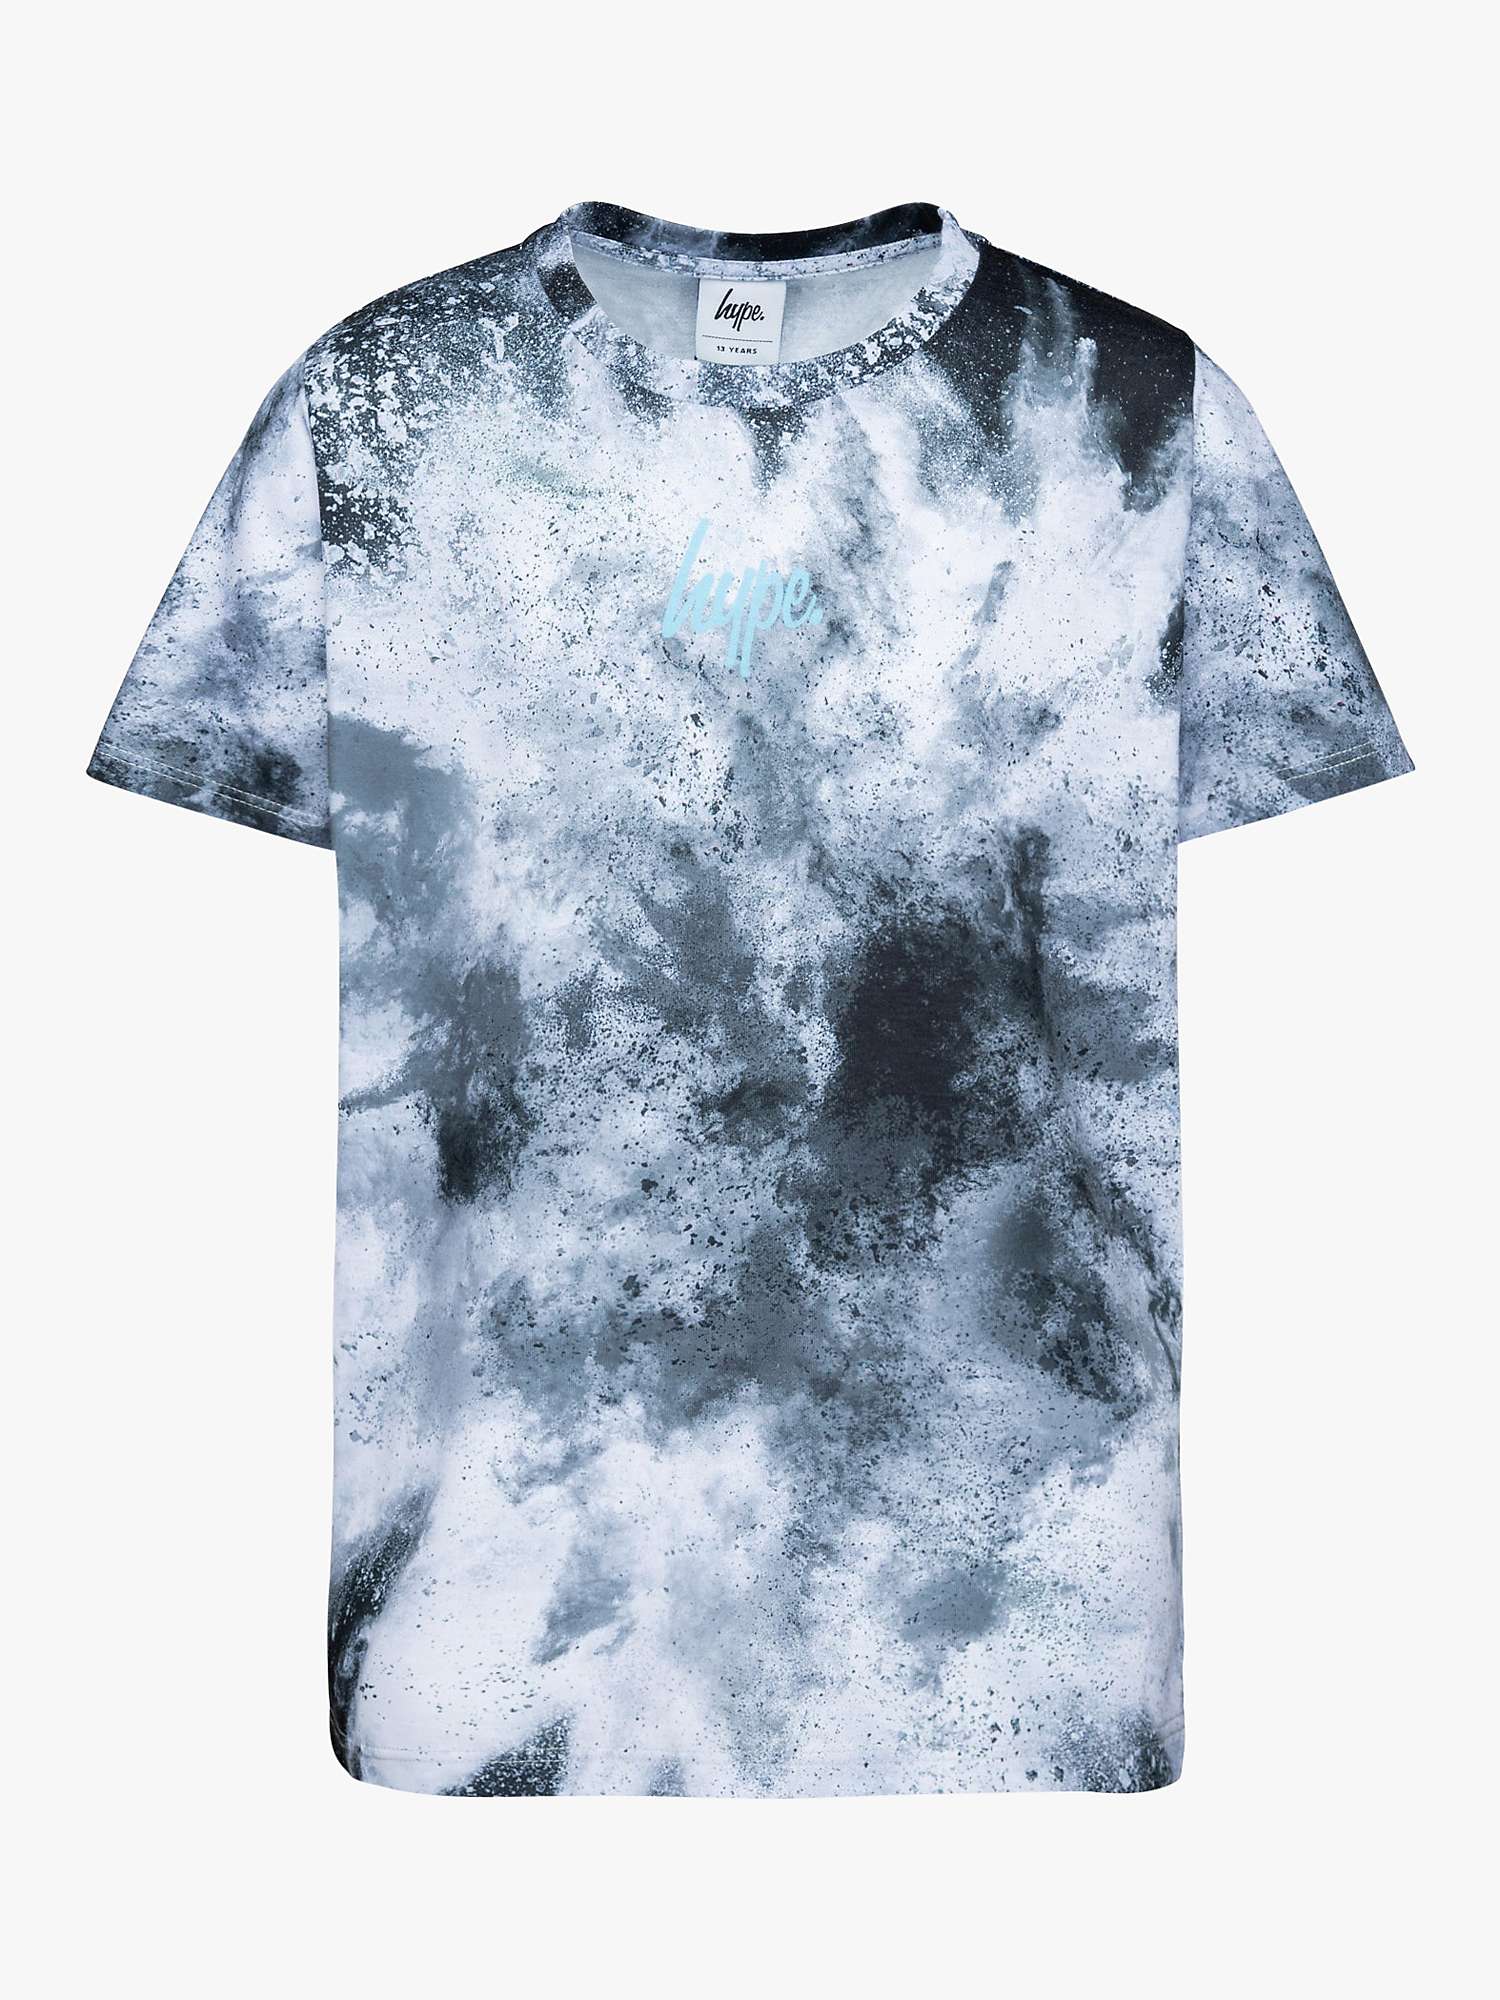 Buy Hype Kids' Explosion Abstract Print T-Shirt, Multi Online at johnlewis.com